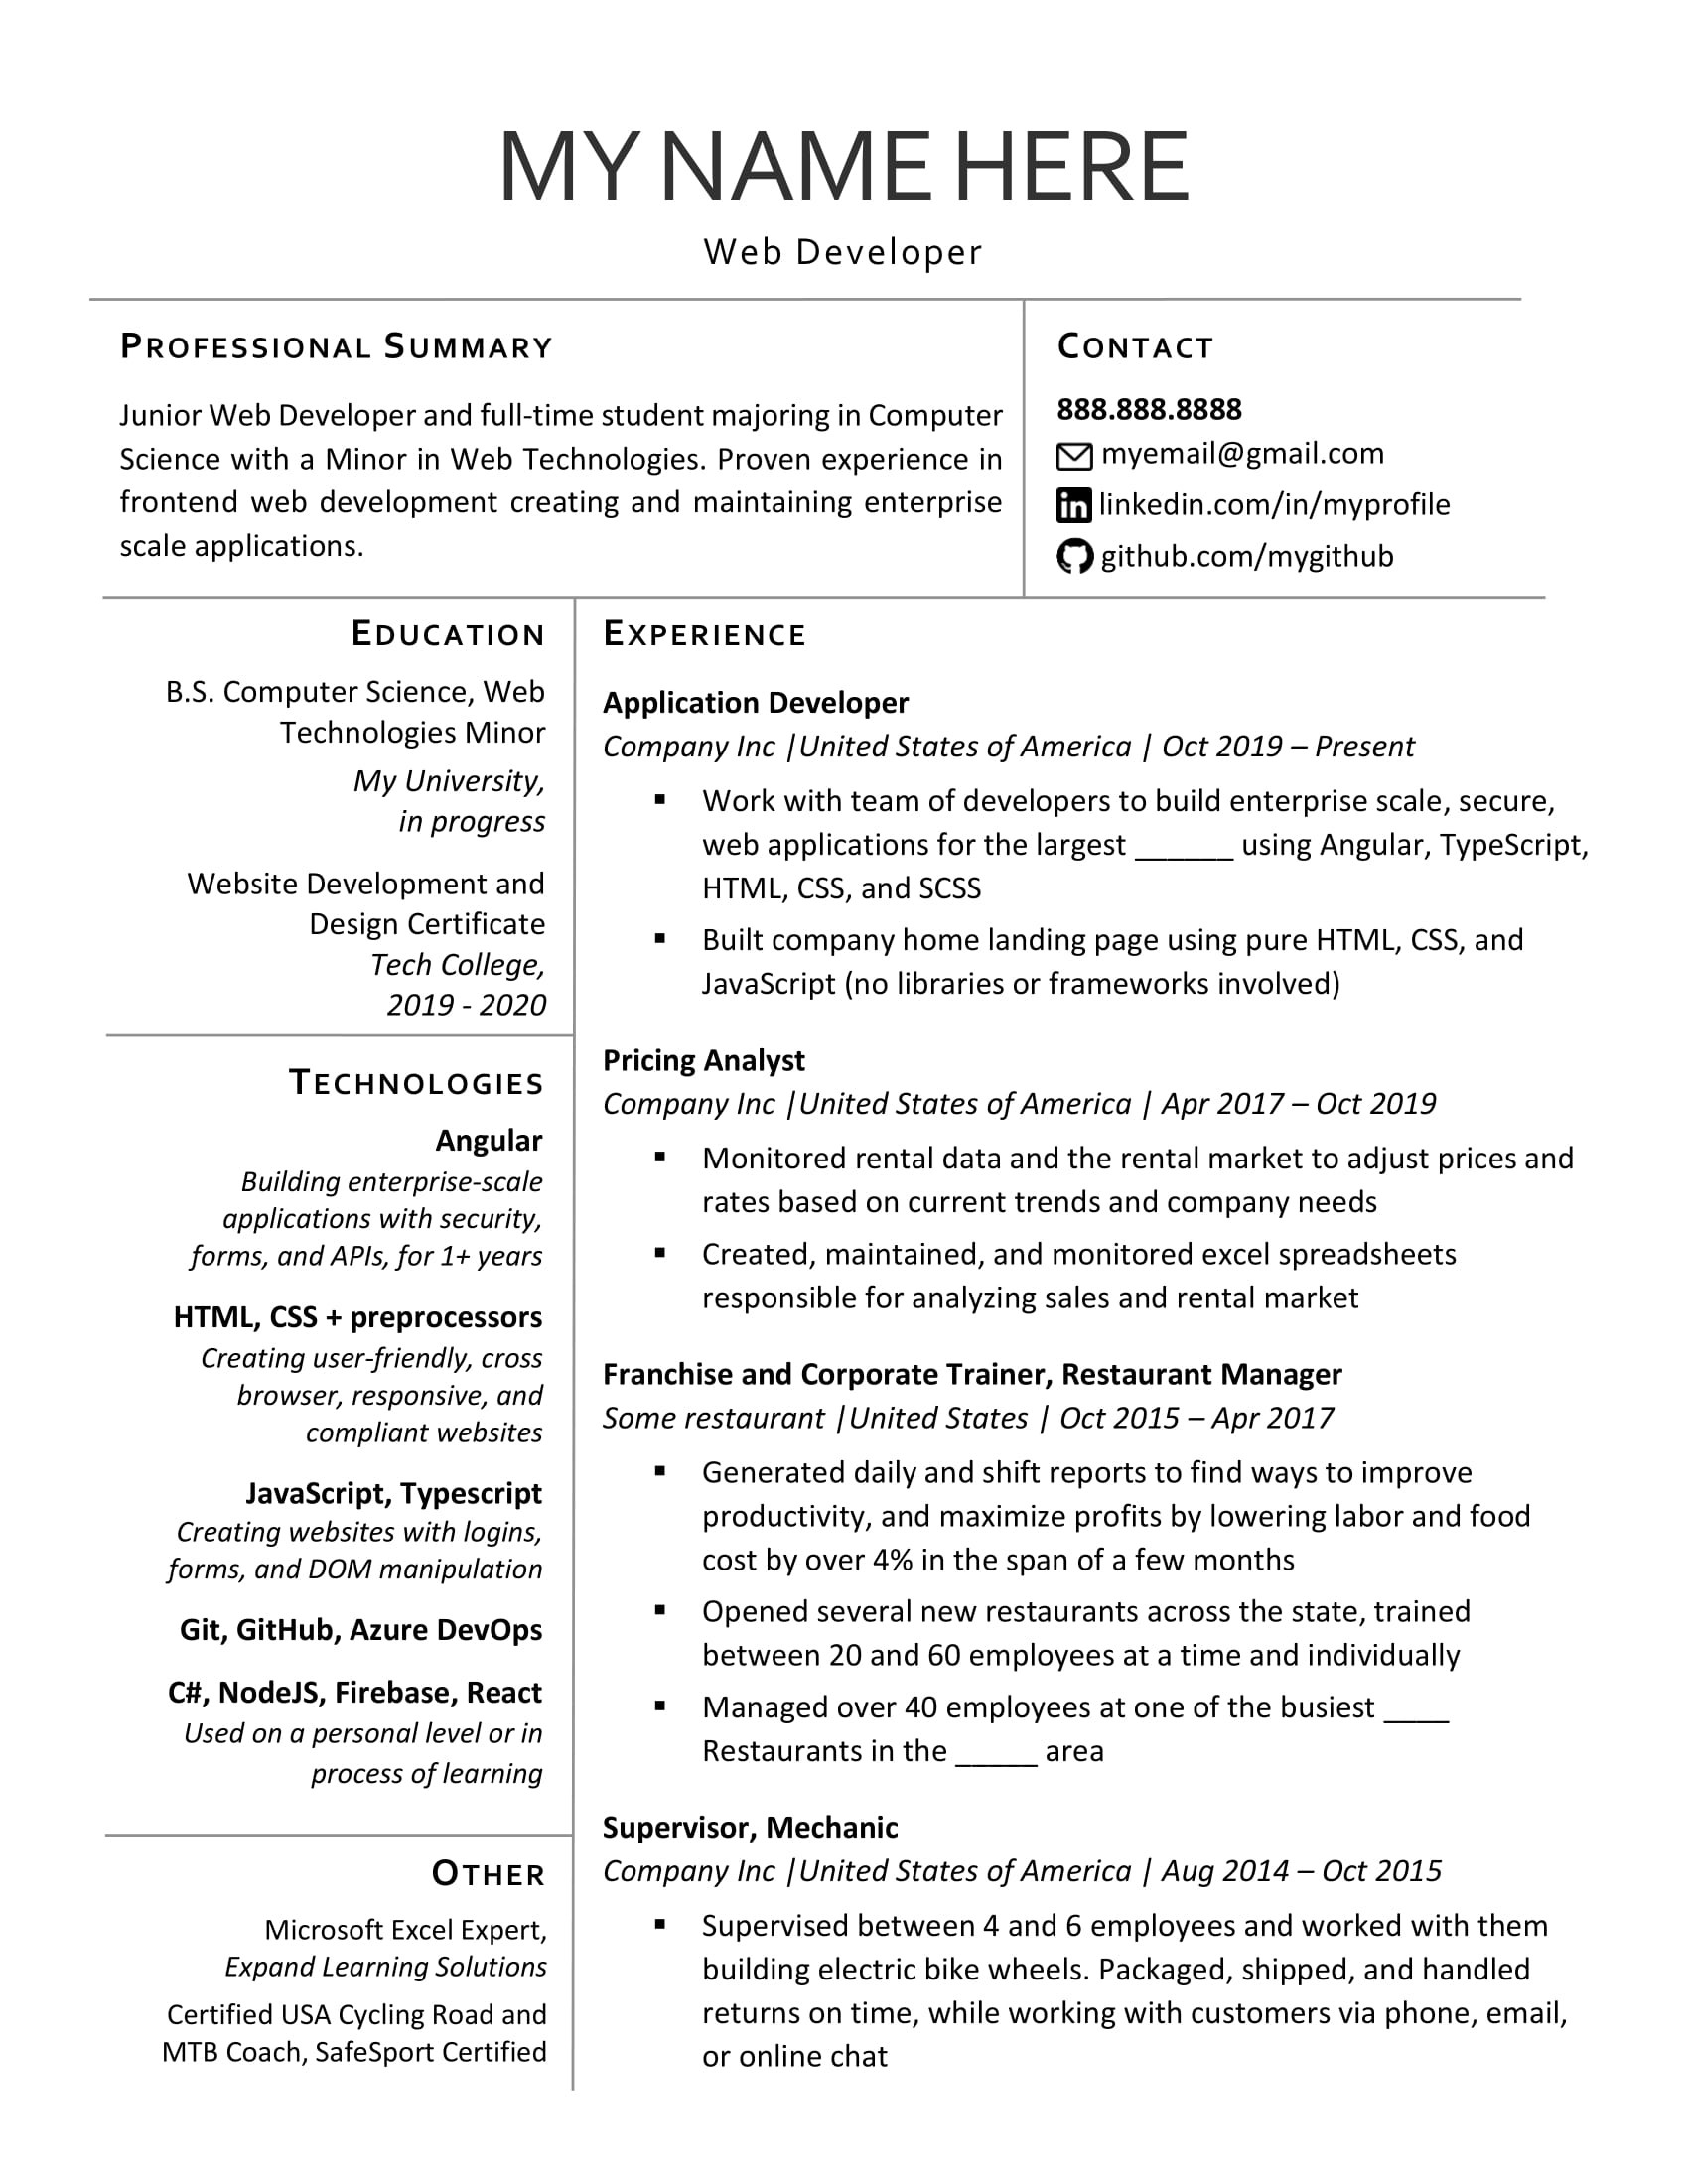 Sample Resume for Computer Science Fresh Graduate Reddit Applying for Cs Web Development Jobs, and Found and Used This …